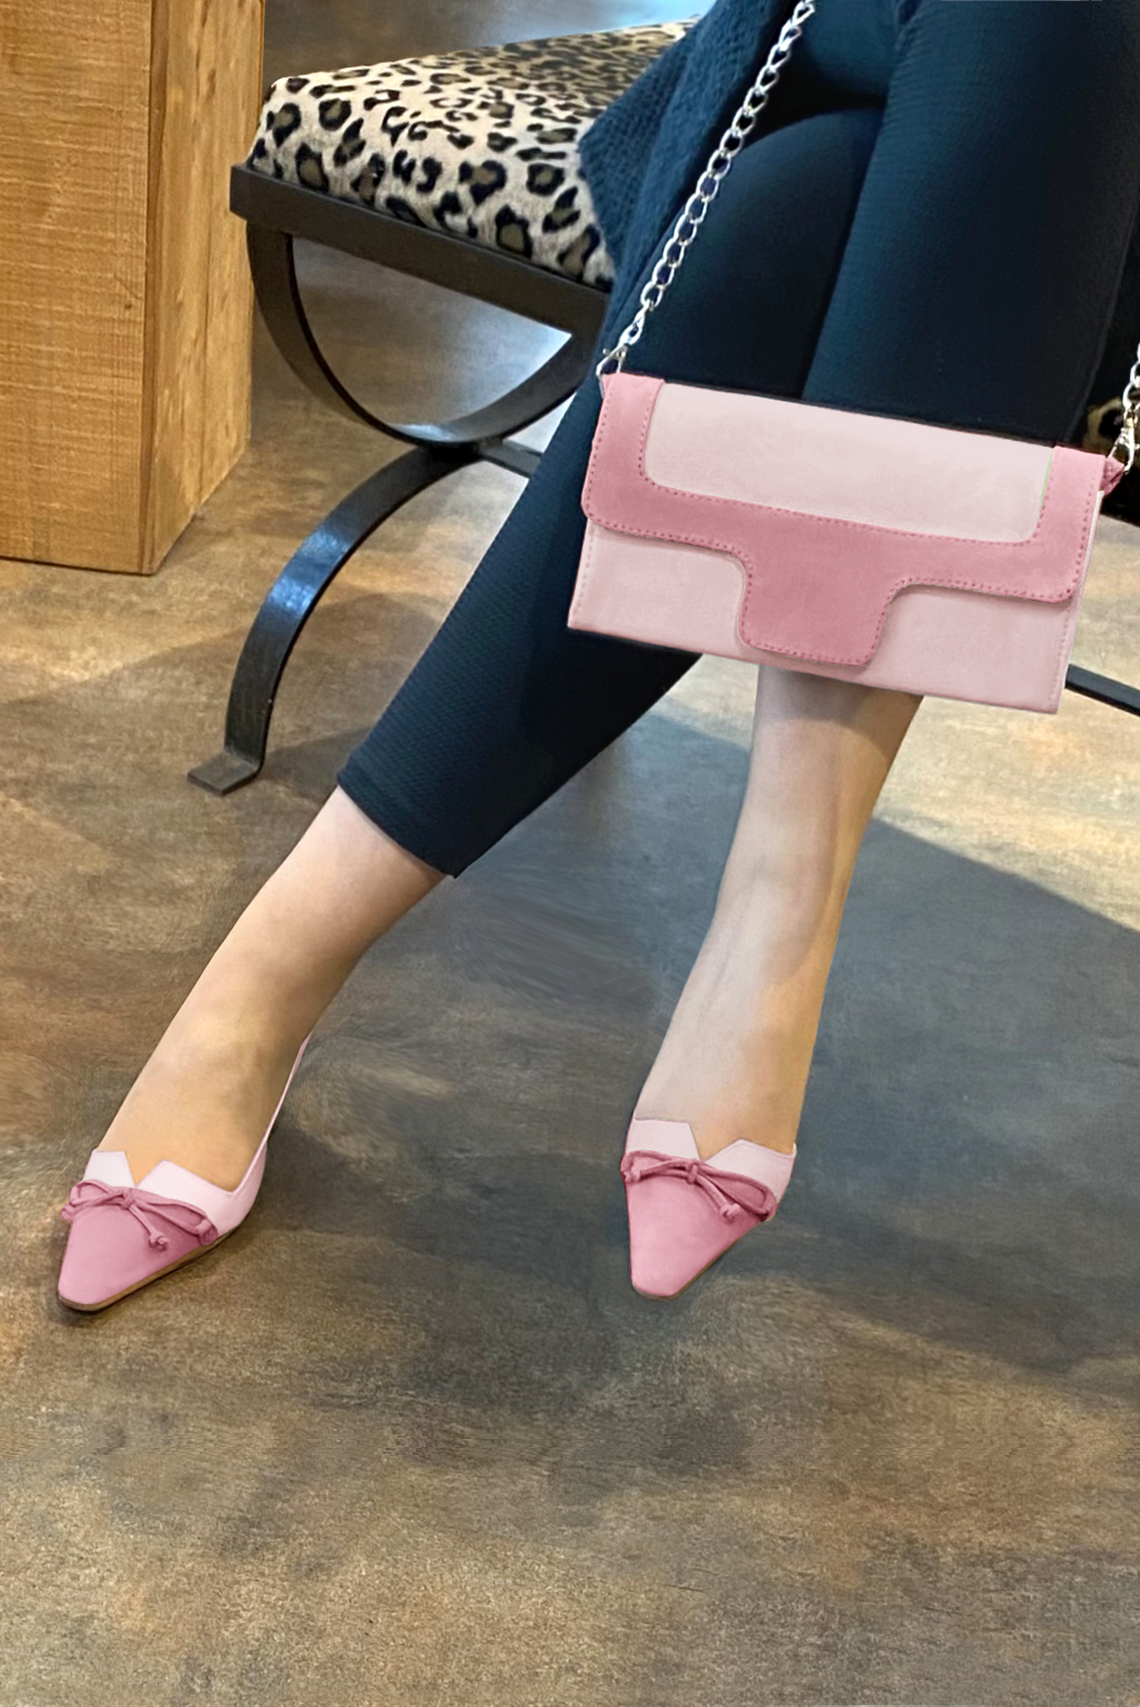 Carnation pink women's open back shoes, with a knot. Tapered toe. Medium spool heels. Worn view - Florence KOOIJMAN